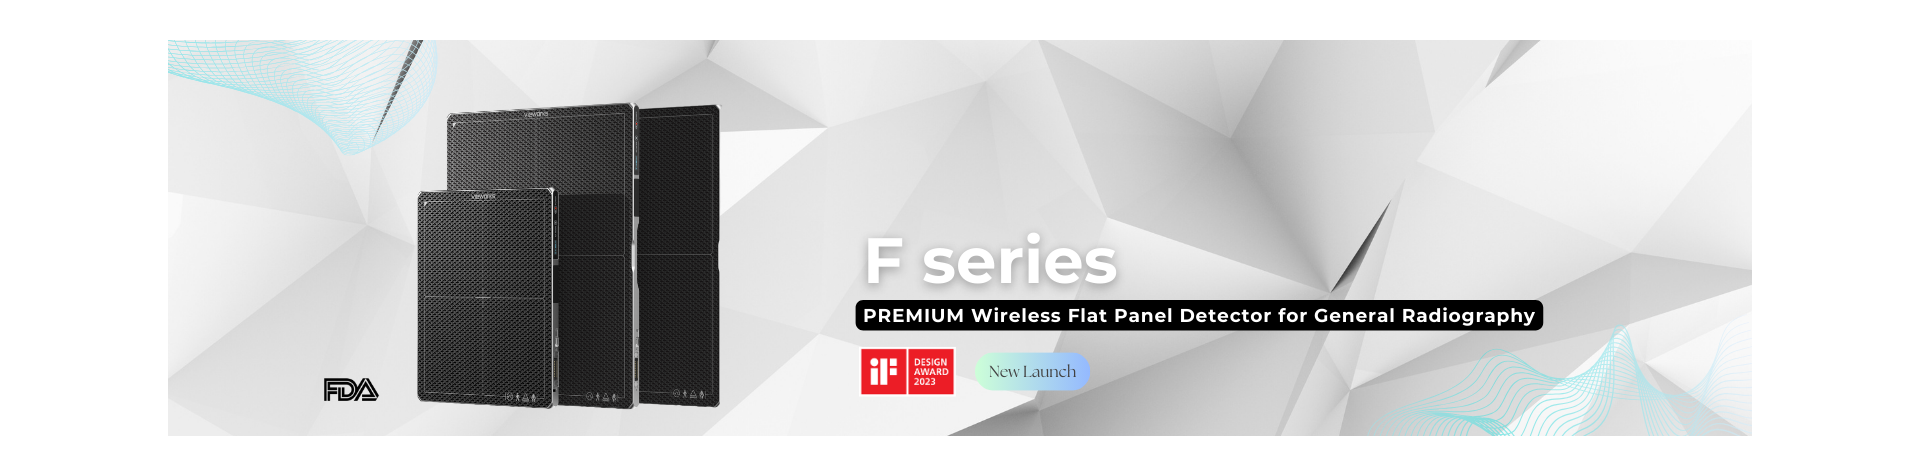 F series FPD New Launch